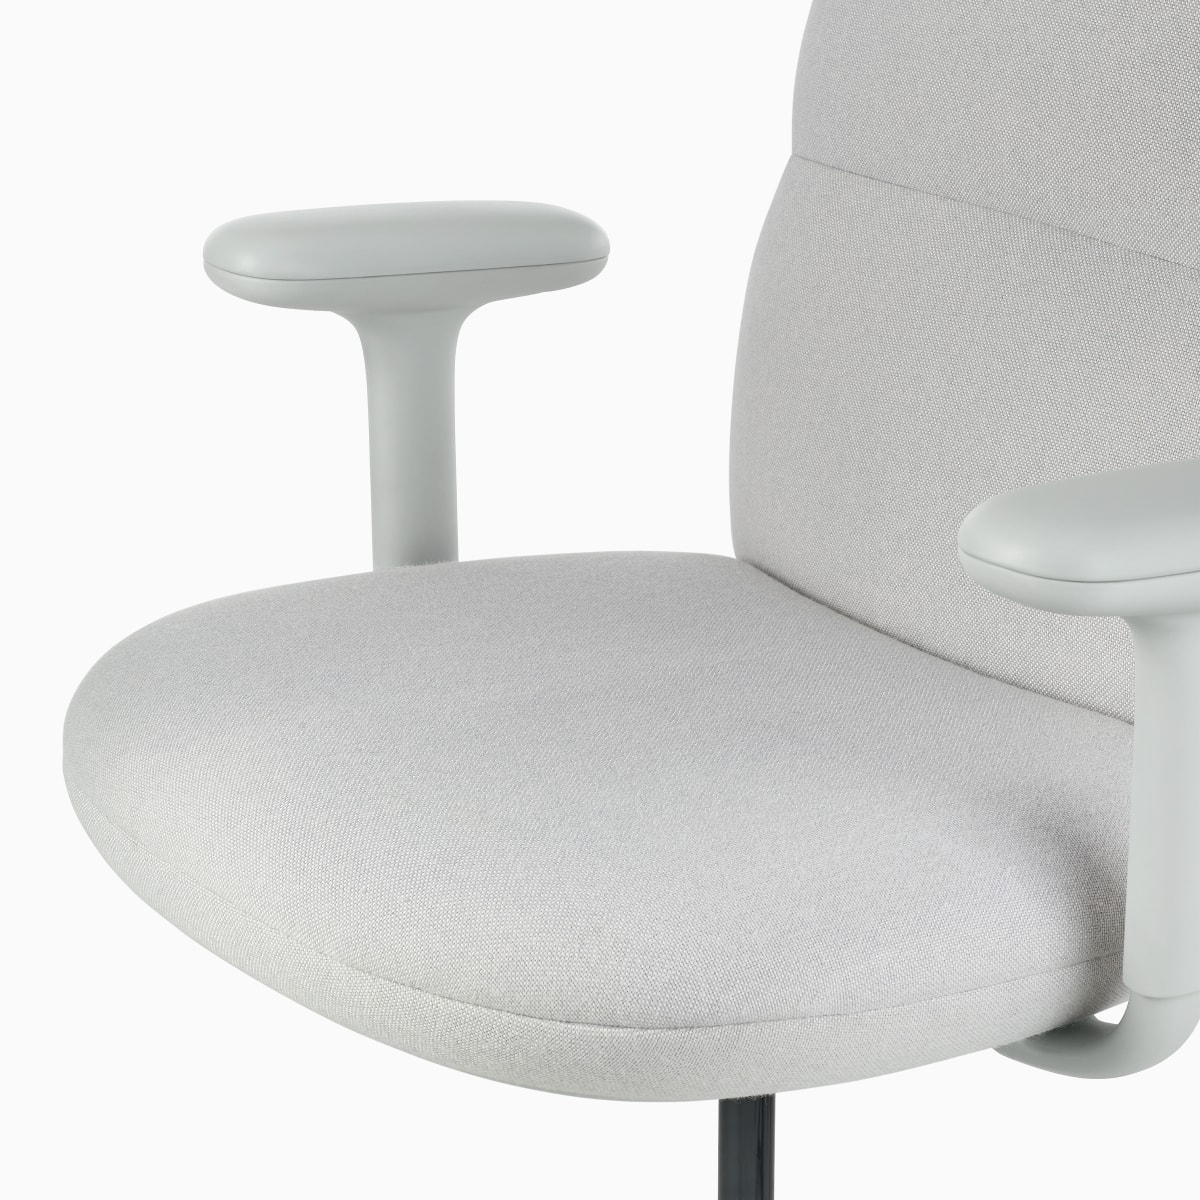 Detail view of an Asari chair by Herman Miller in light grey.